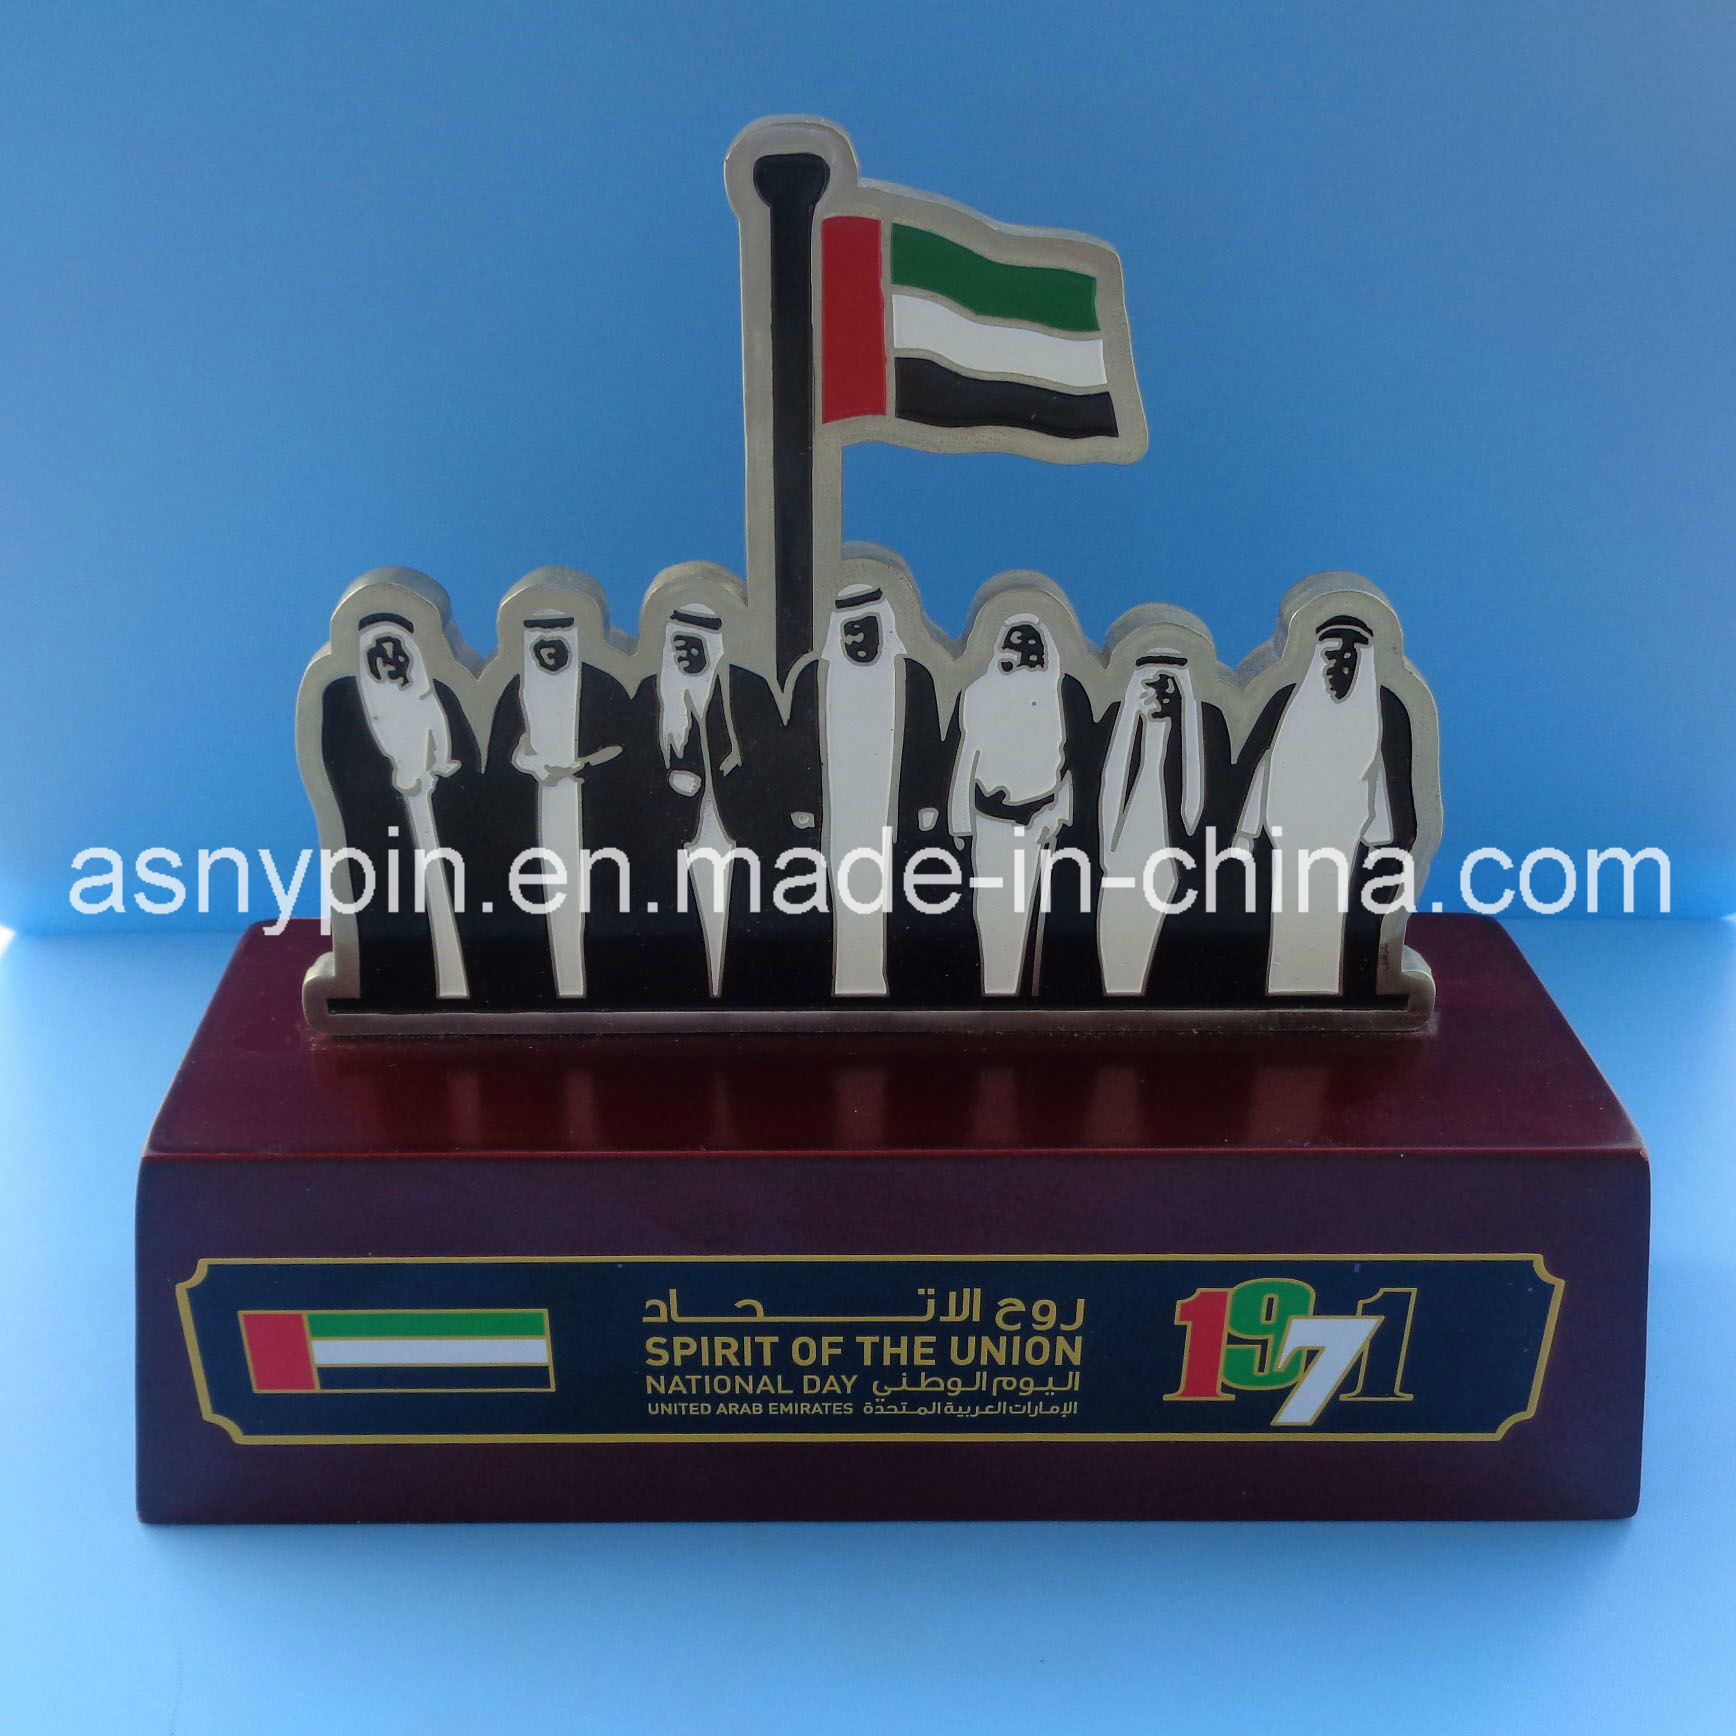 UAE 7 Sheikhs Wooden Plaque National Day Souvenirs